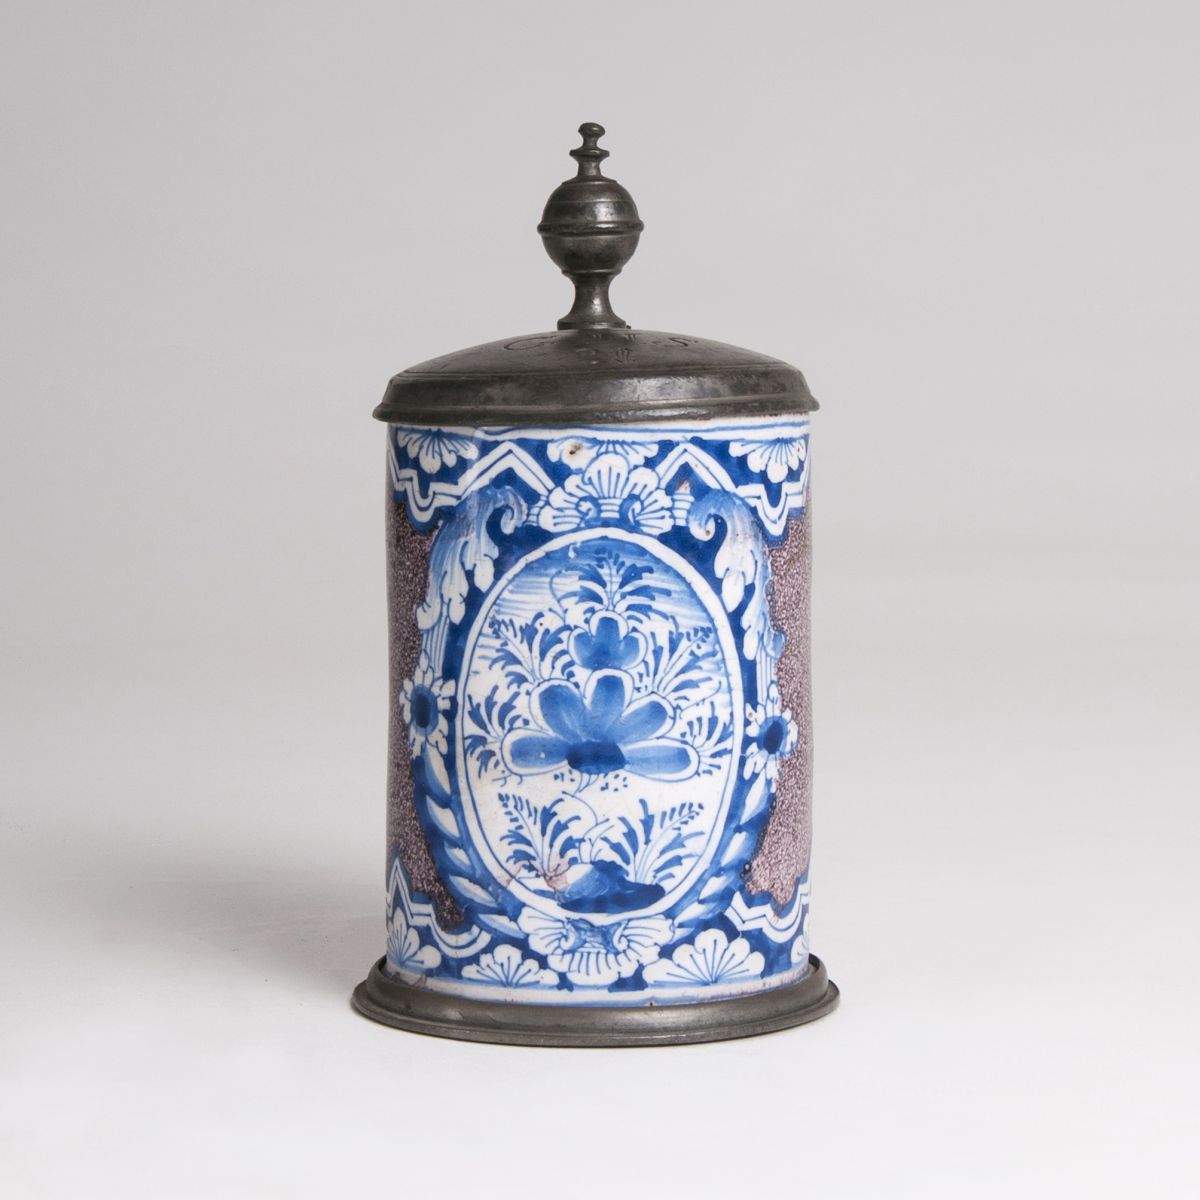 A small faience tankard with blue painting